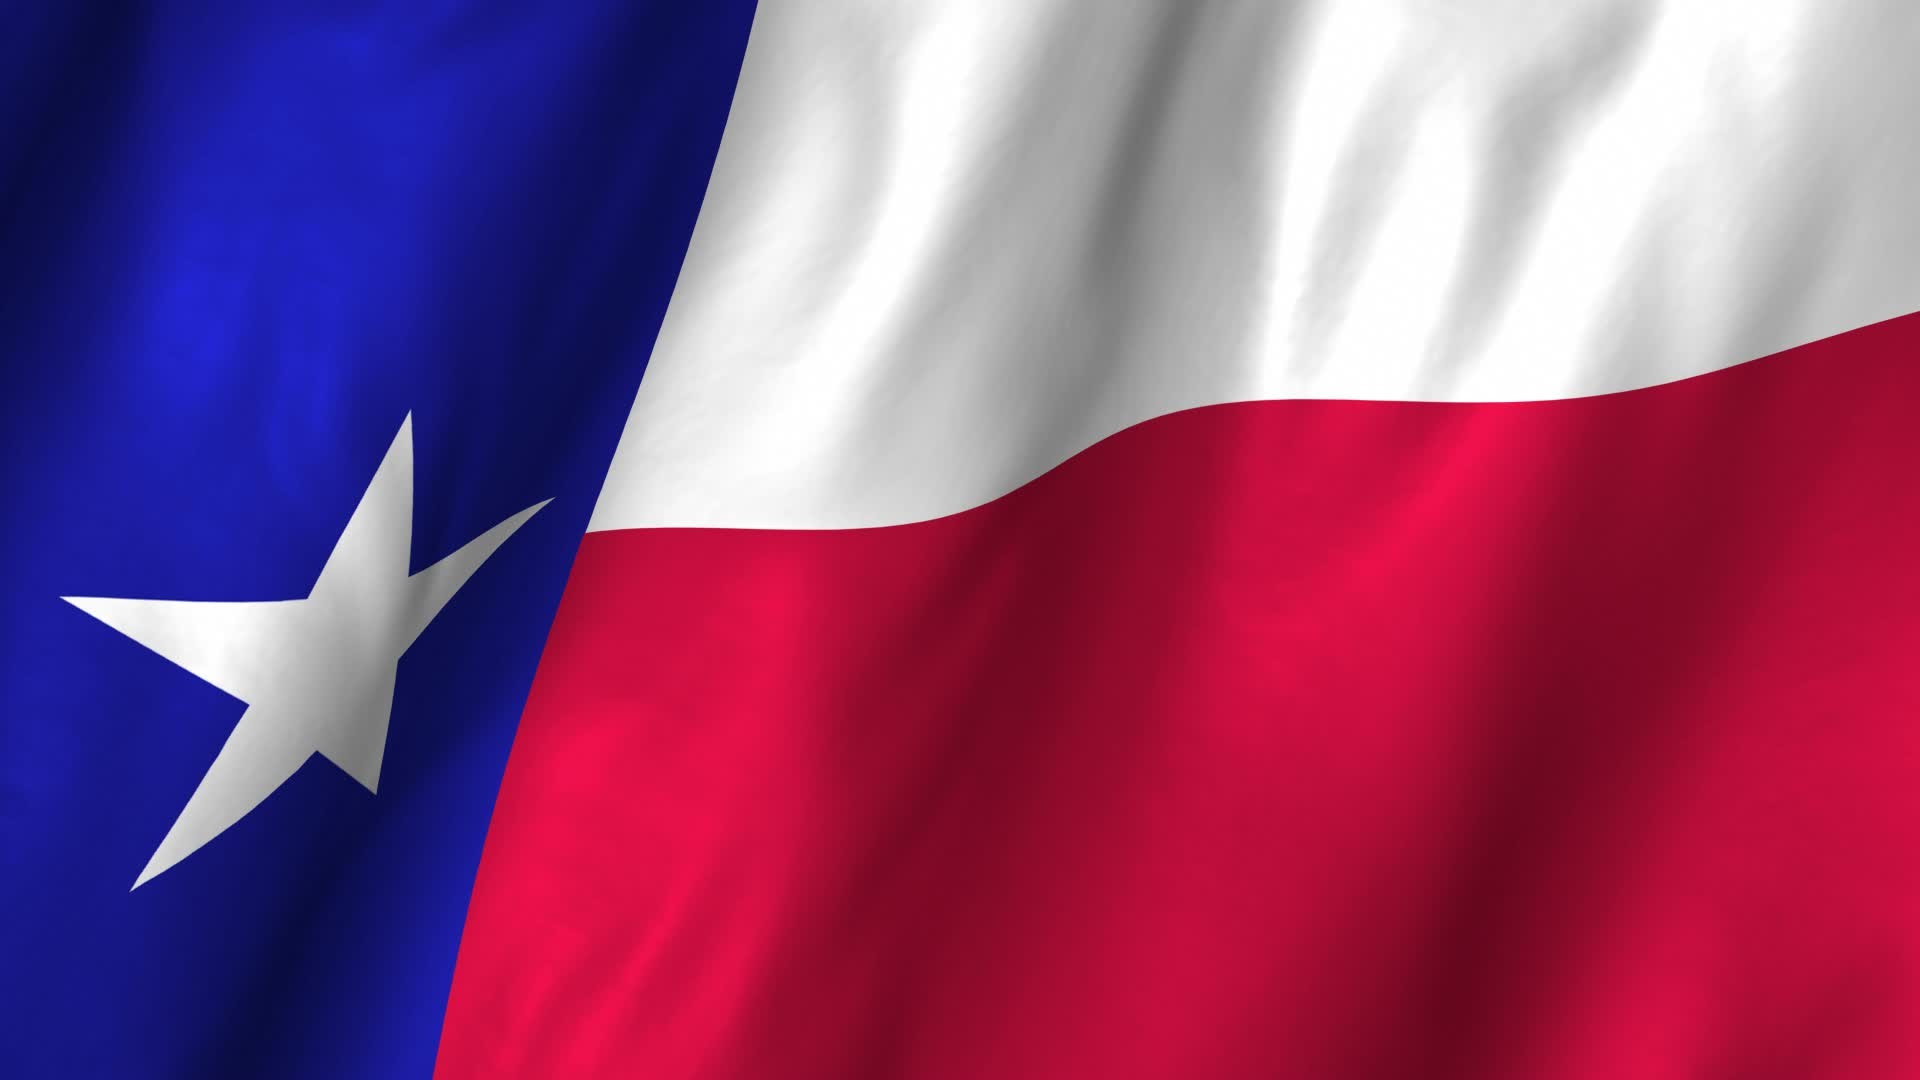 Texas Flag wallpaper ·① Download free cool HD wallpapers 